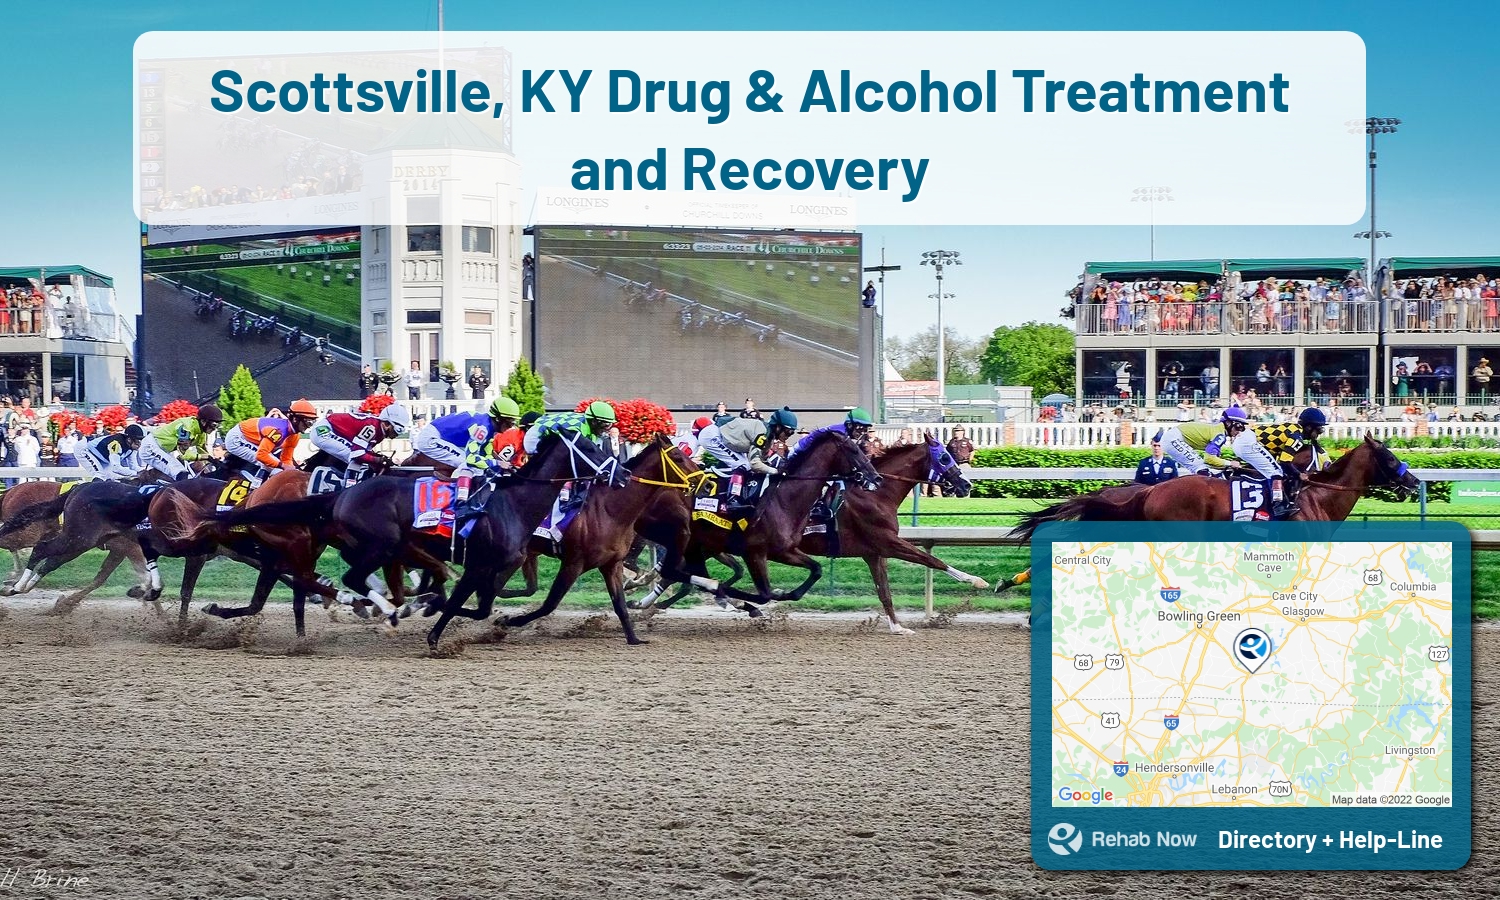 Scottsville, KY Treatment Centers. Find drug rehab in Scottsville, Kentucky, or detox and treatment programs. Get the right help now!